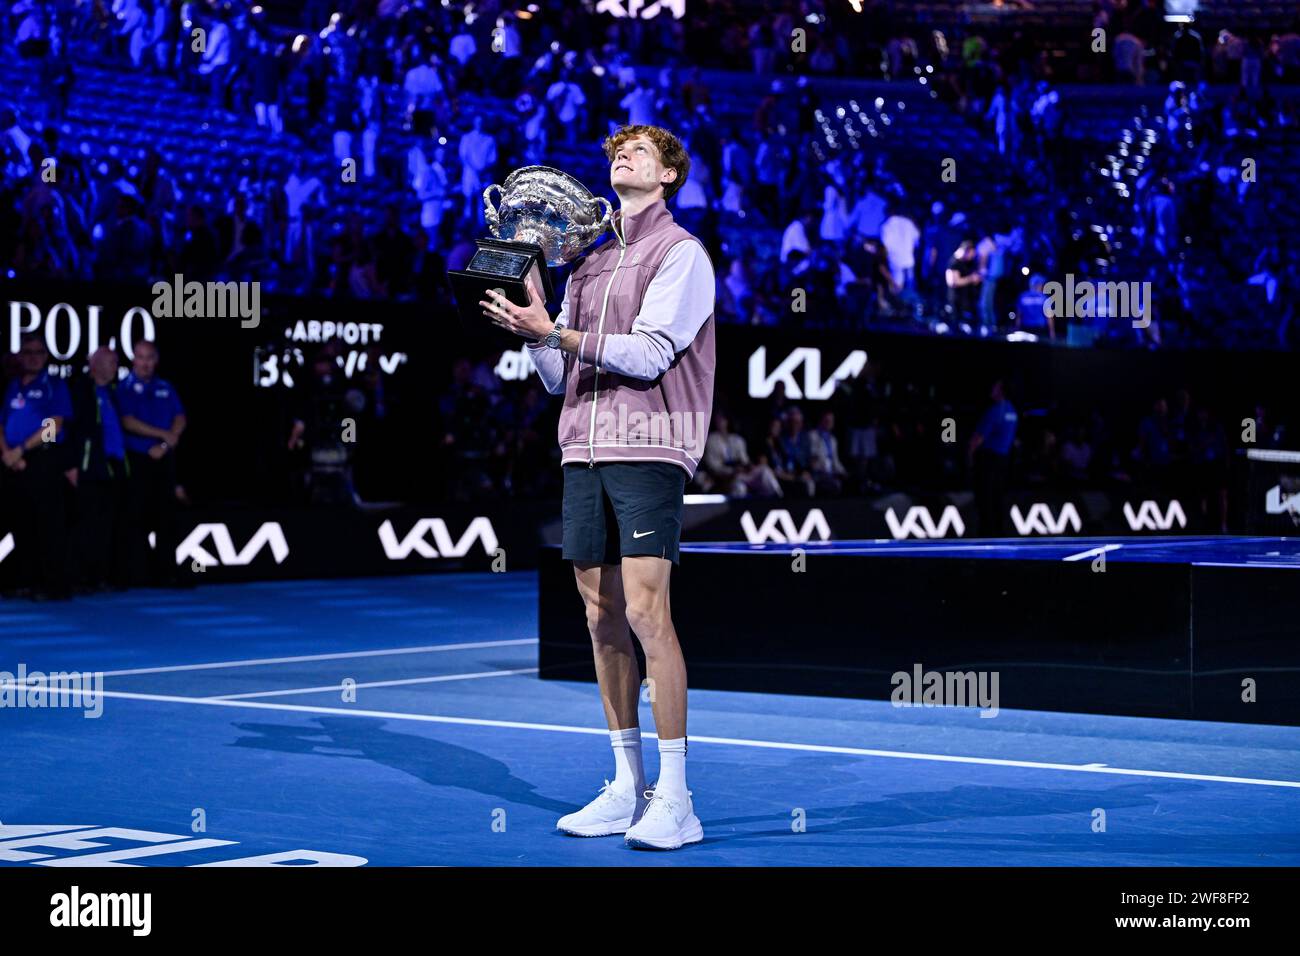 Jannik Sinner of Italy with the Norman Brookes cup trophy during the Australian Open AO 2024 men's final Grand Slam tennis tournament on January 28, 2024 at Melbourne Park in Australia. Stock Photo